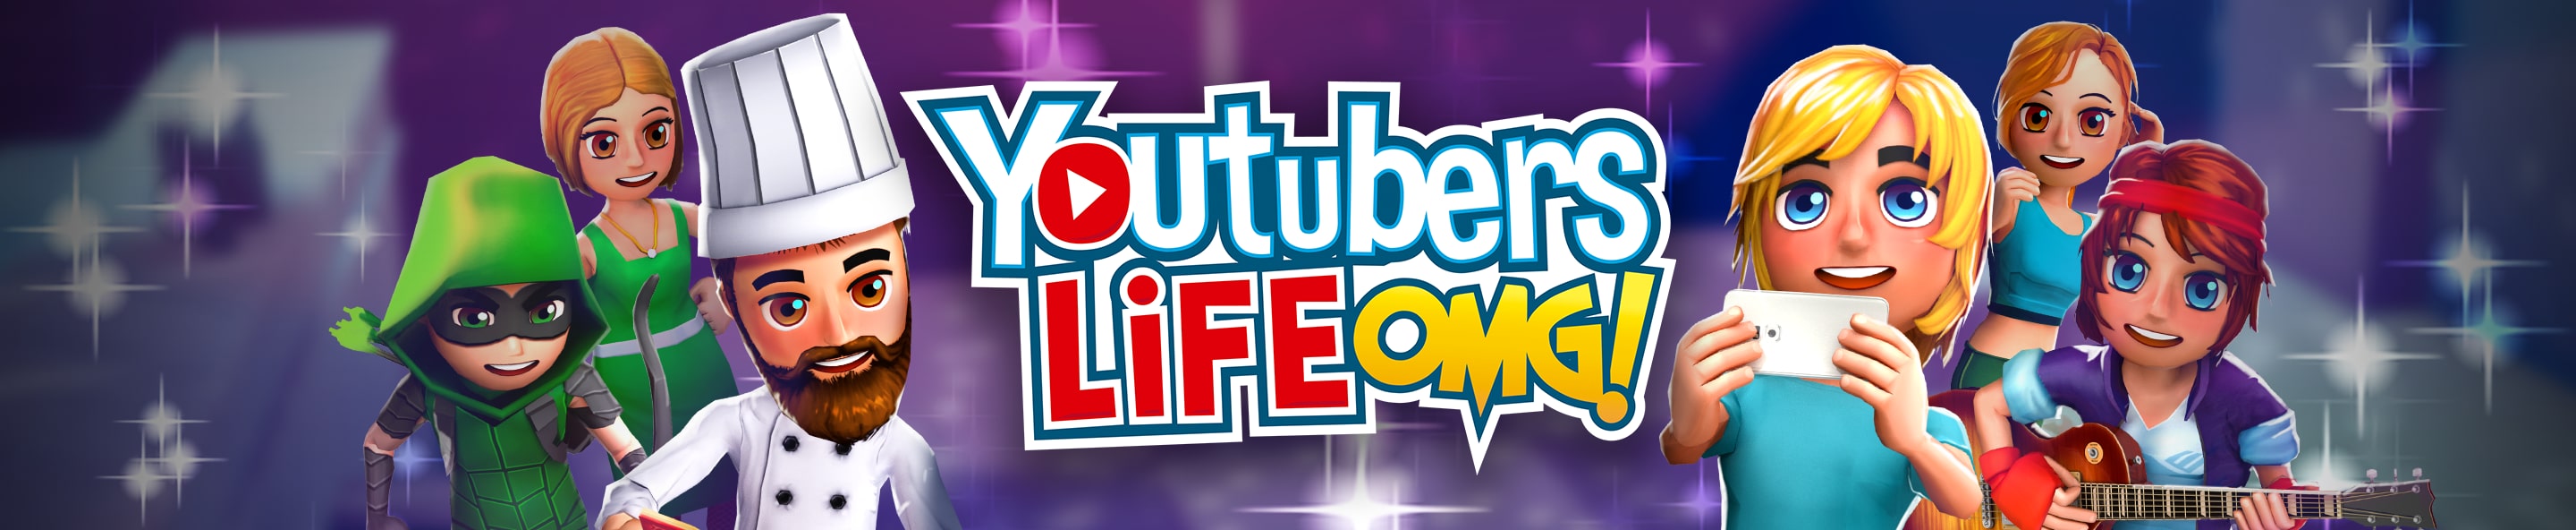 youtubers life switch